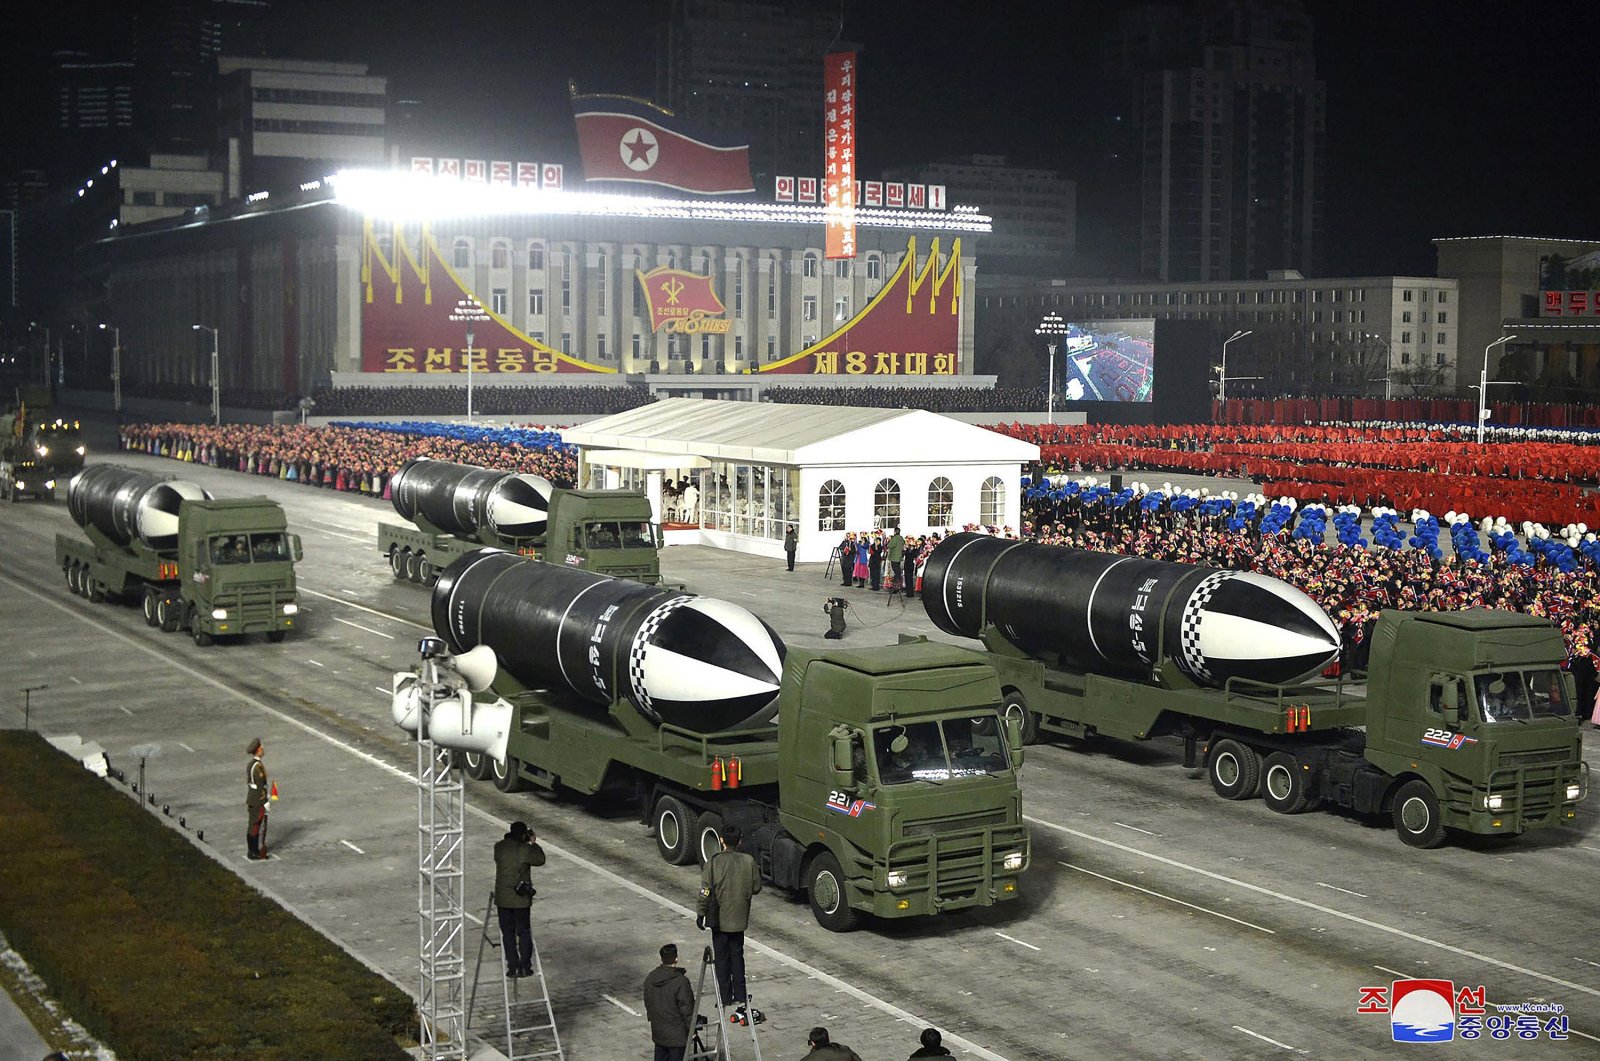 Missiles during a military parade marking the ruling party congress at Kim Il Sung Square in Pyongyang, North Korea on  Jan. 14, 2021. (AP Photo)